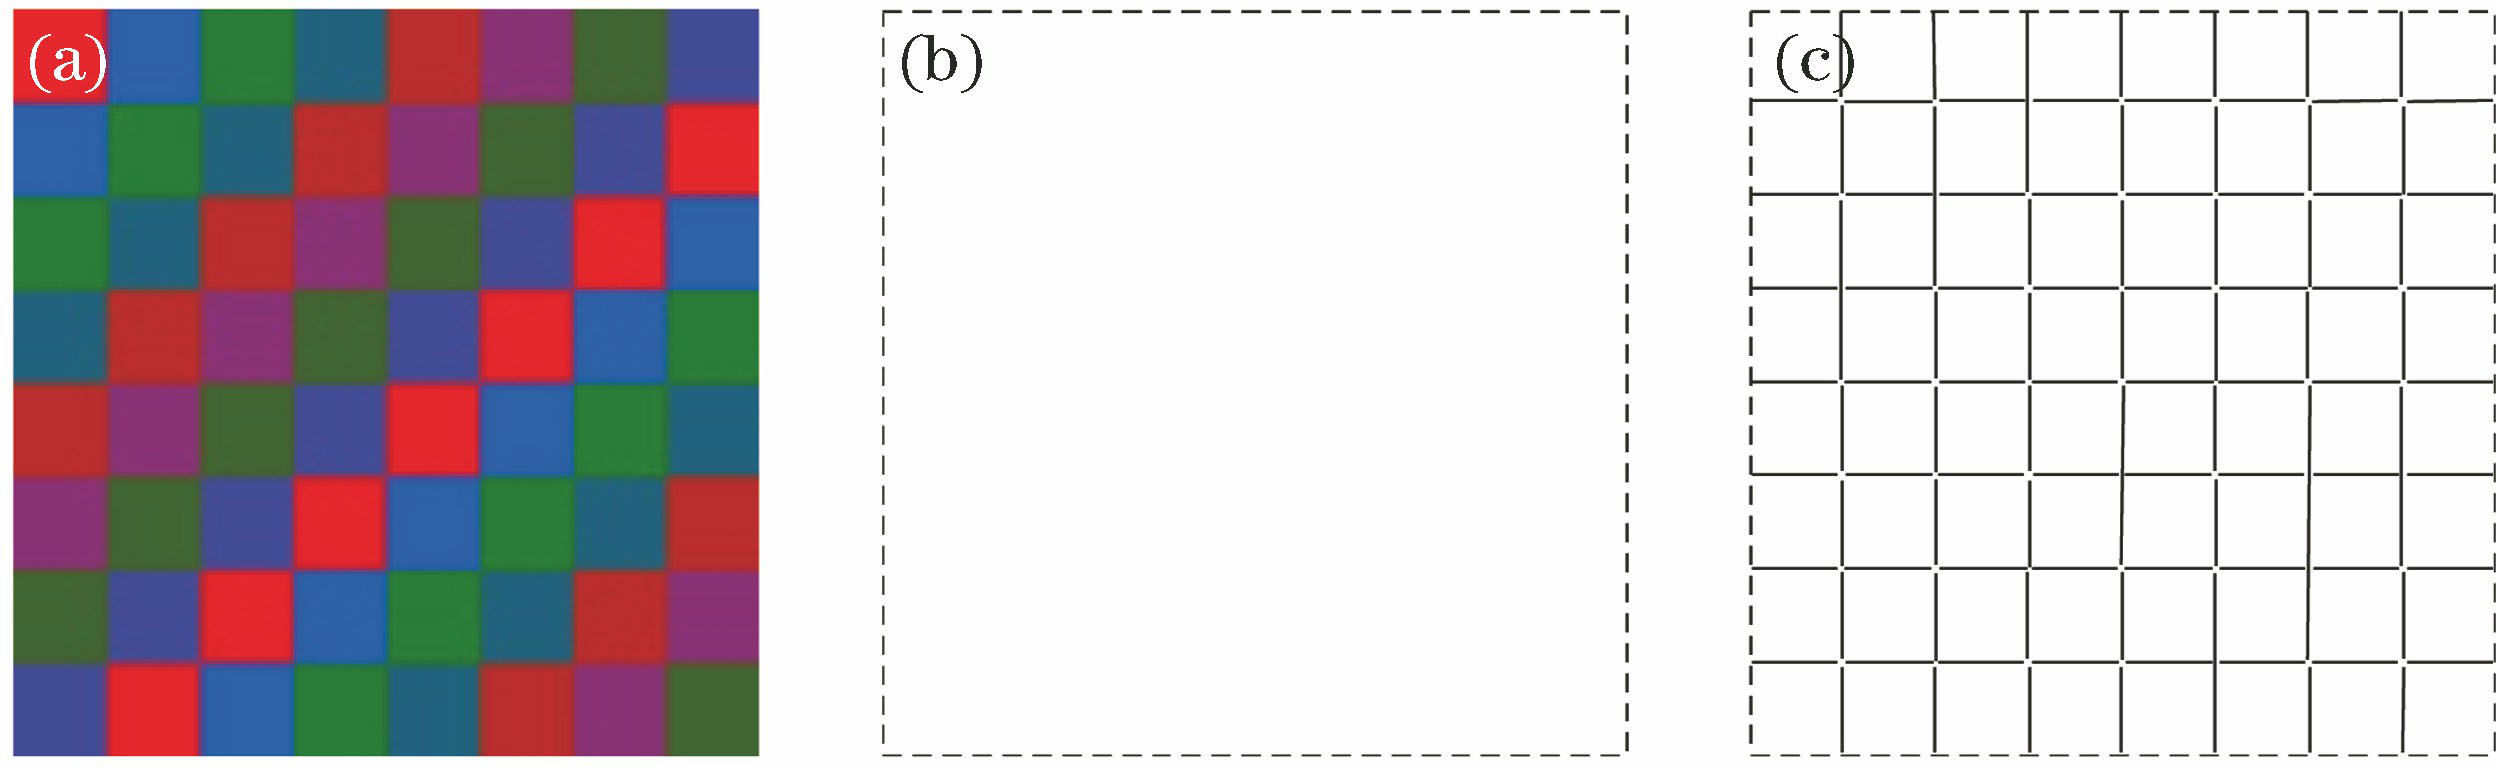 Problem of direct straight line segment detection on gray-value images. (a) Test image; (b) detection result of CannyLines algorithm<sup>[<xref ref-type="bibr" rid="b20">20</xref>]</sup> (no straight line segment is detected); (c) detection result of proposed algorithm